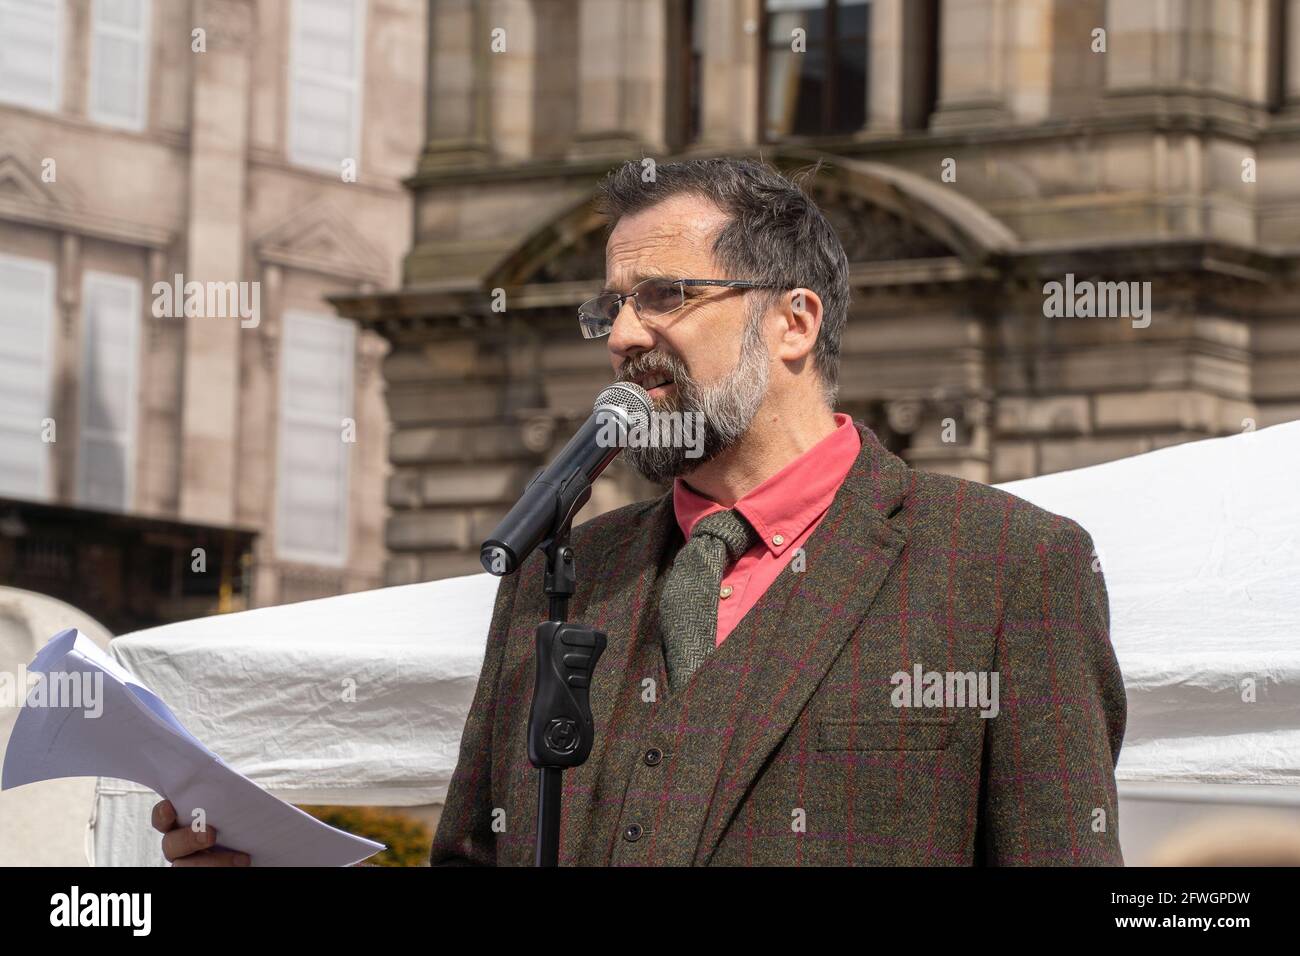 George Square, Glasgow, Scotland, UK, 22nd of May 2021: key speaker David Scott, (Northern Exposure Correspondent for The UK column) giving his speech to the large crowd gathered for an anti lockdown protest in front of the council building in George Square, Glasgow city centre, organised by (unite for truth), the event had numerous speakers addressing the crowd. They are protesting the ongoing lockdown restrictions which are seen throughout Scotland. The organisers had entertainment, which seen the crowd dancing to the music and hugging each other in excitement. The event lasted for 4 hours.  Stock Photo